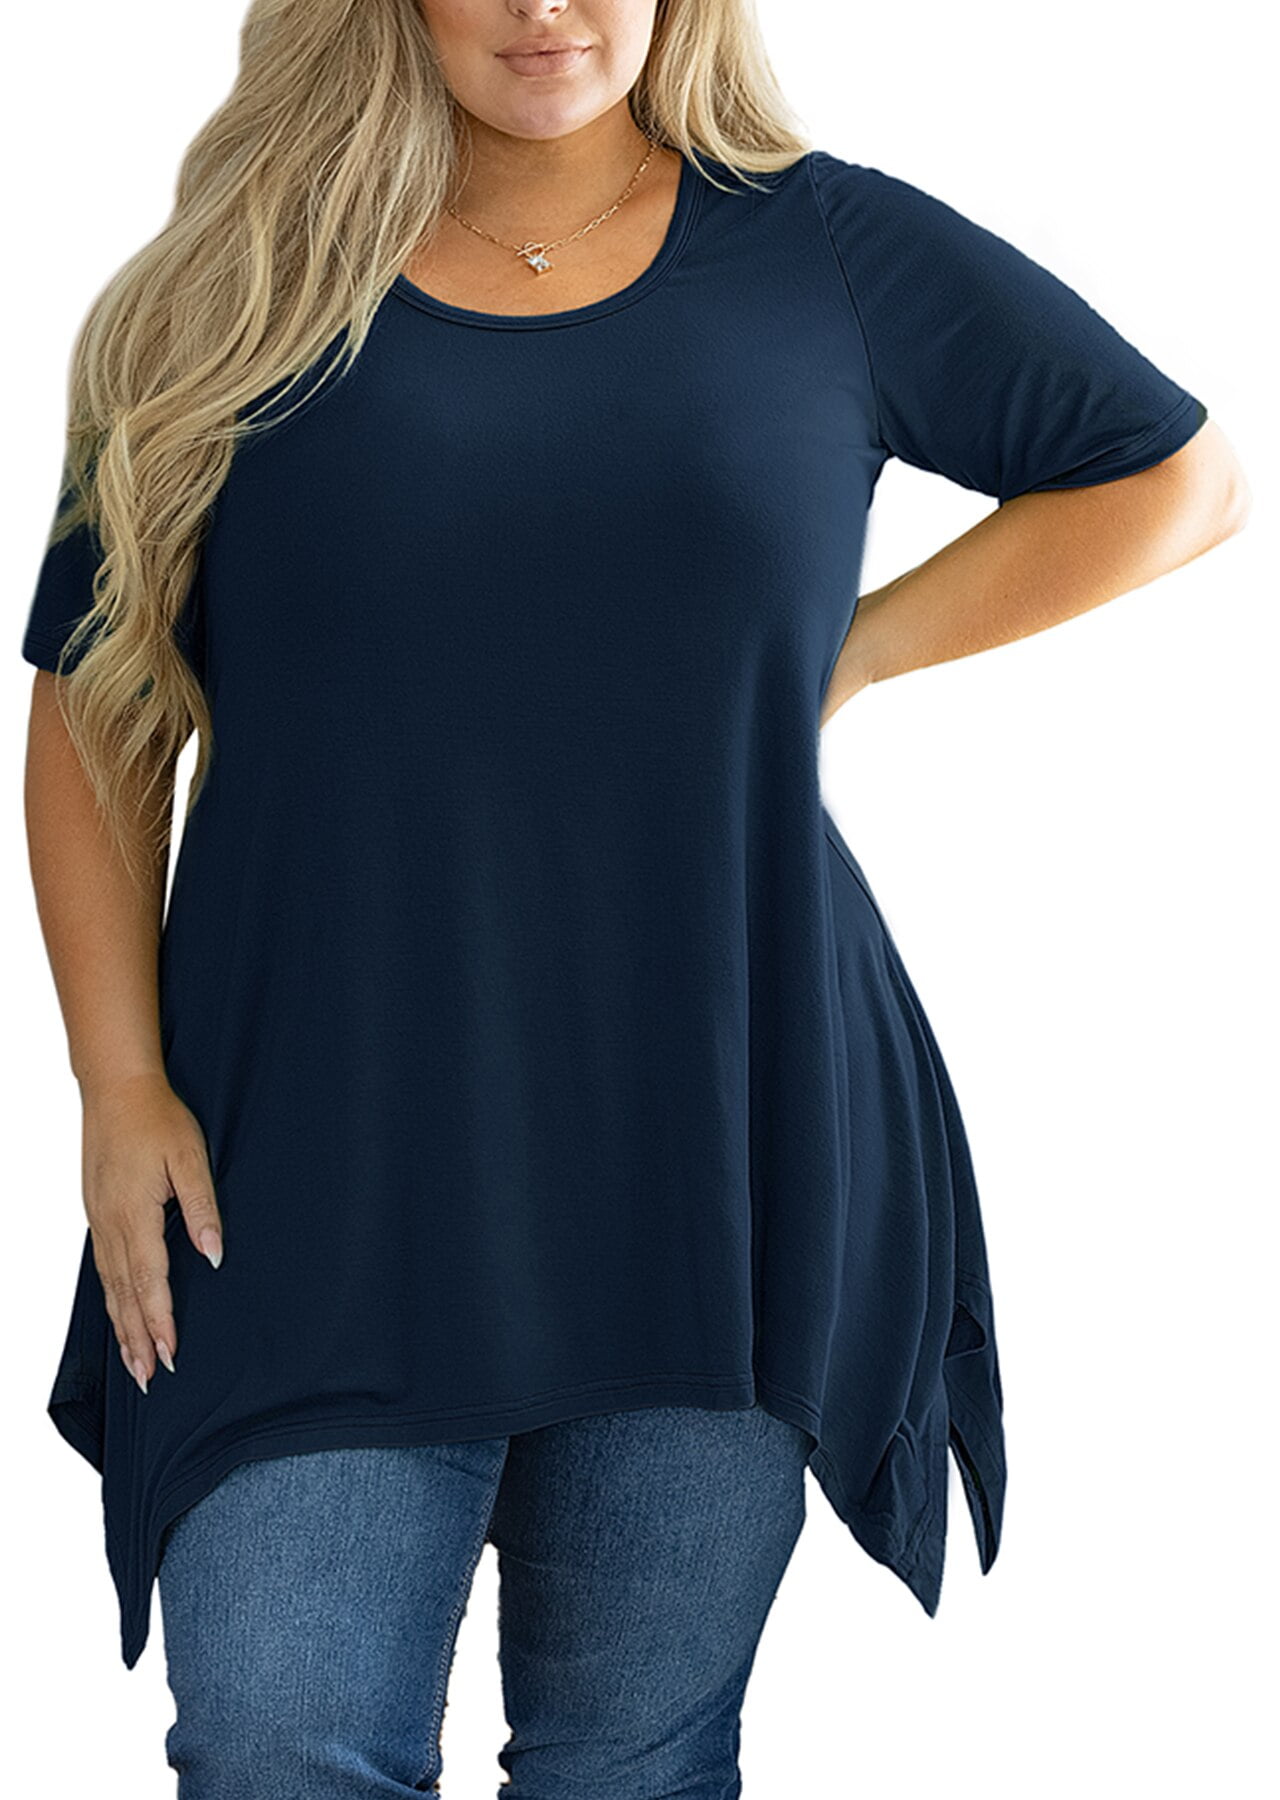 SHOWMALL Plus Size Clothing for Women Tunic Tops Short Sleeve Navy Blue 5X  Summer Blouse Swing Tee Crewneck Clothes Flowy Shirt for Leggings